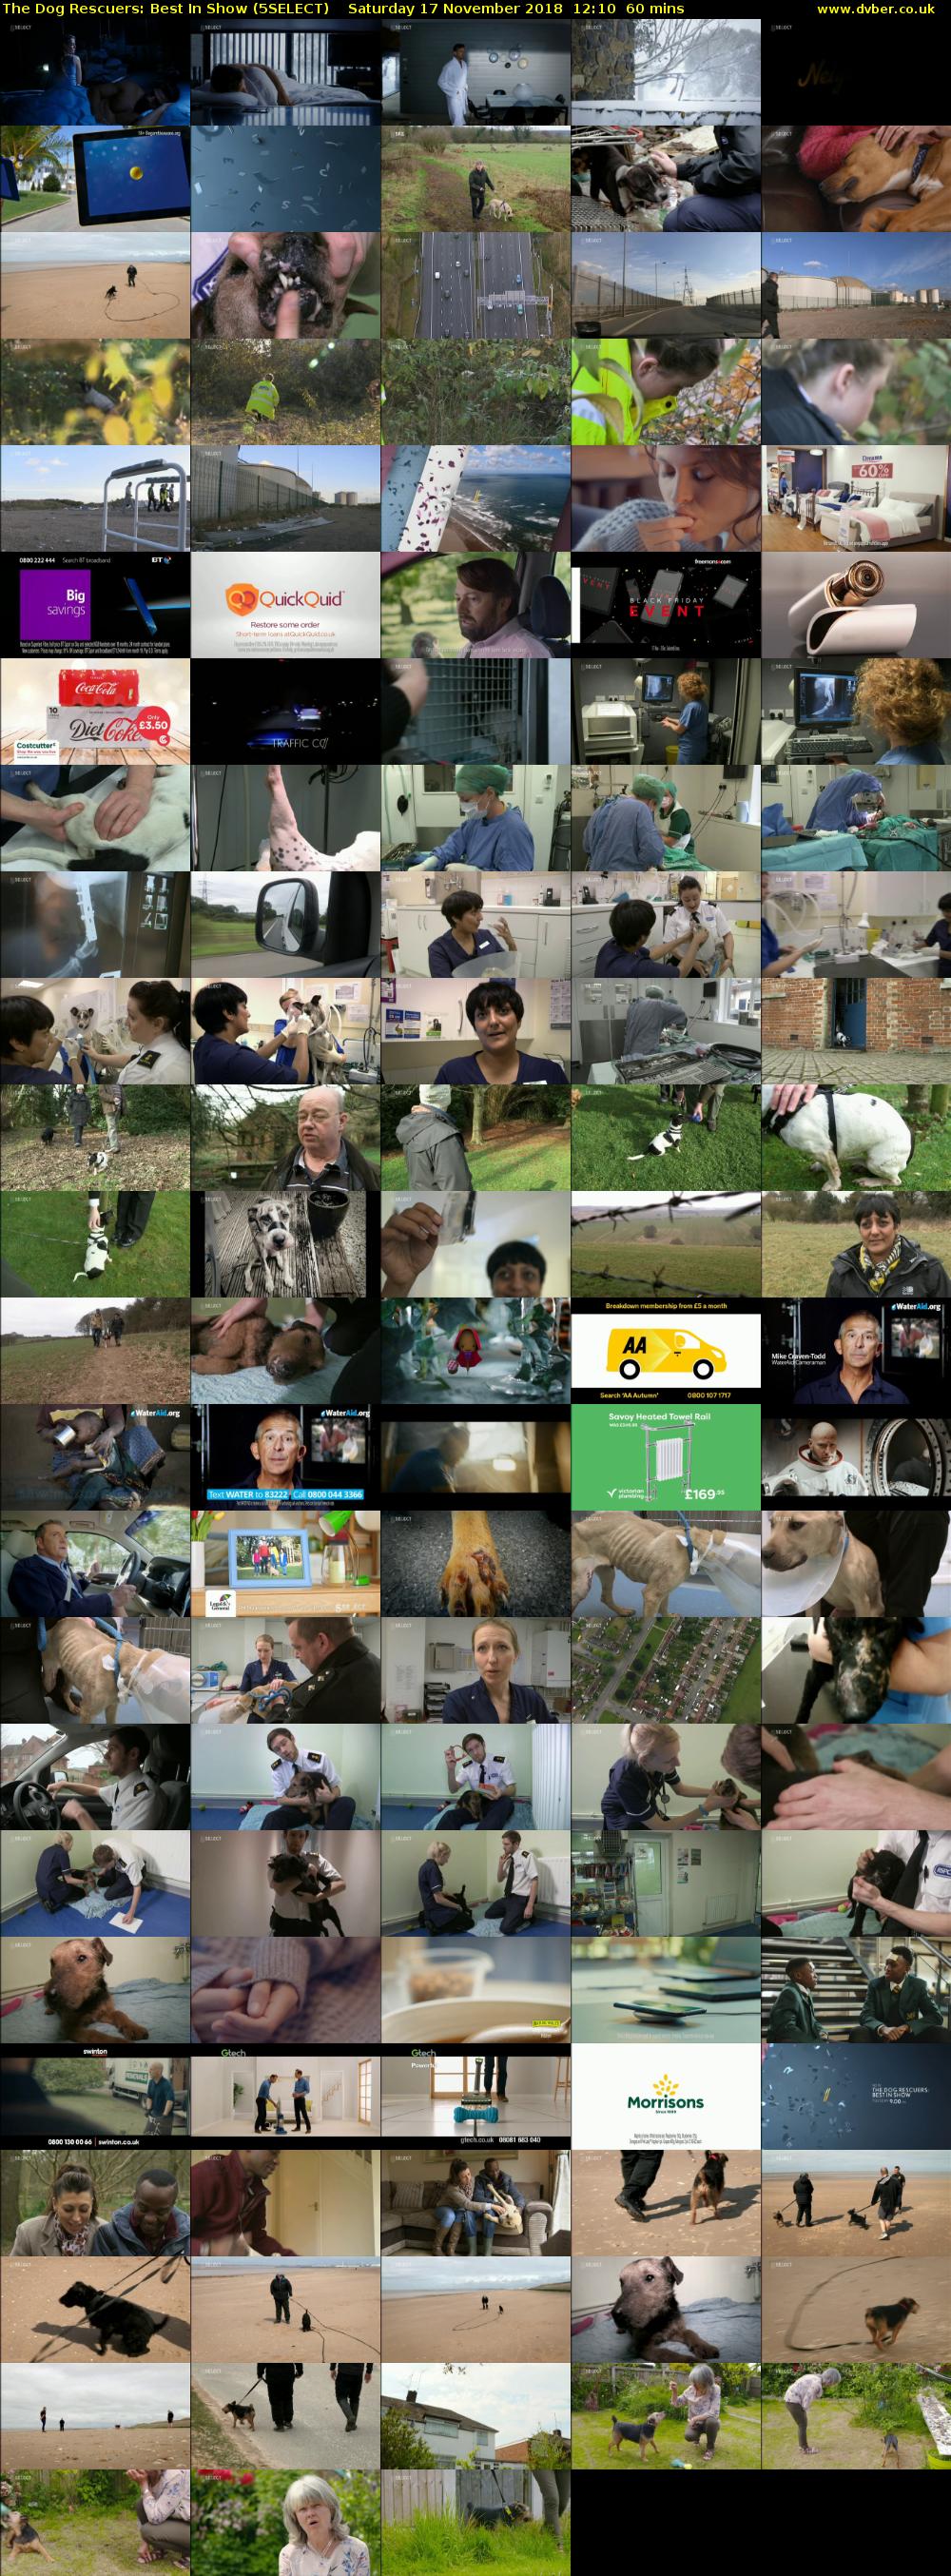 The Dog Rescuers: Best In Show (5SELECT) Saturday 17 November 2018 12:10 - 13:10